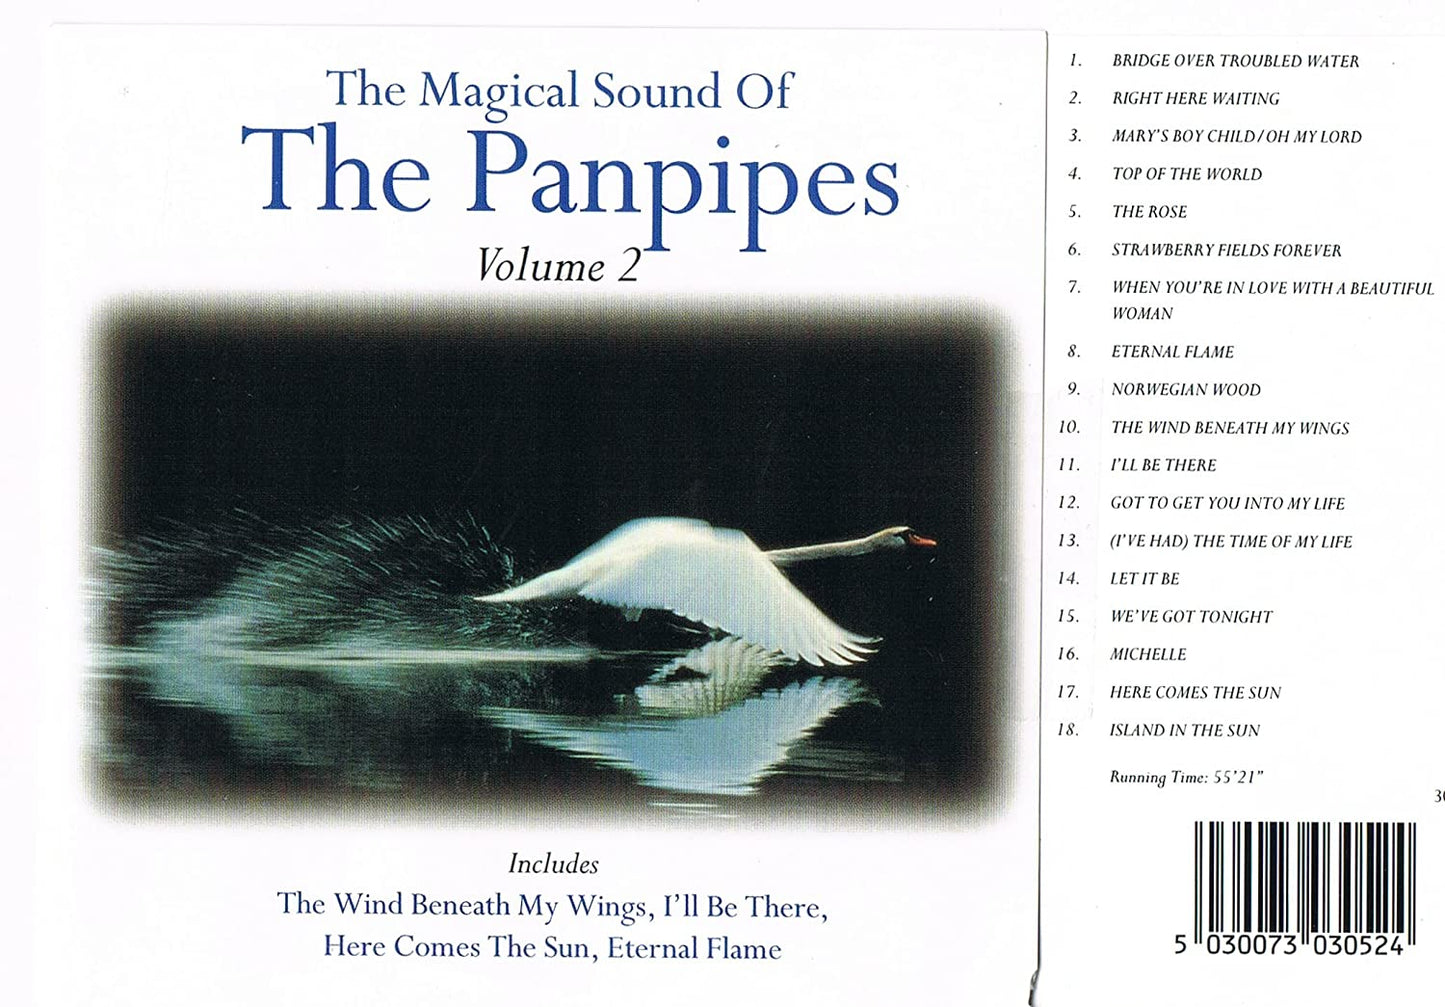 The Magical Sound of the Panpipes - Volume 2 (18 Songs) [Audio CD] Various